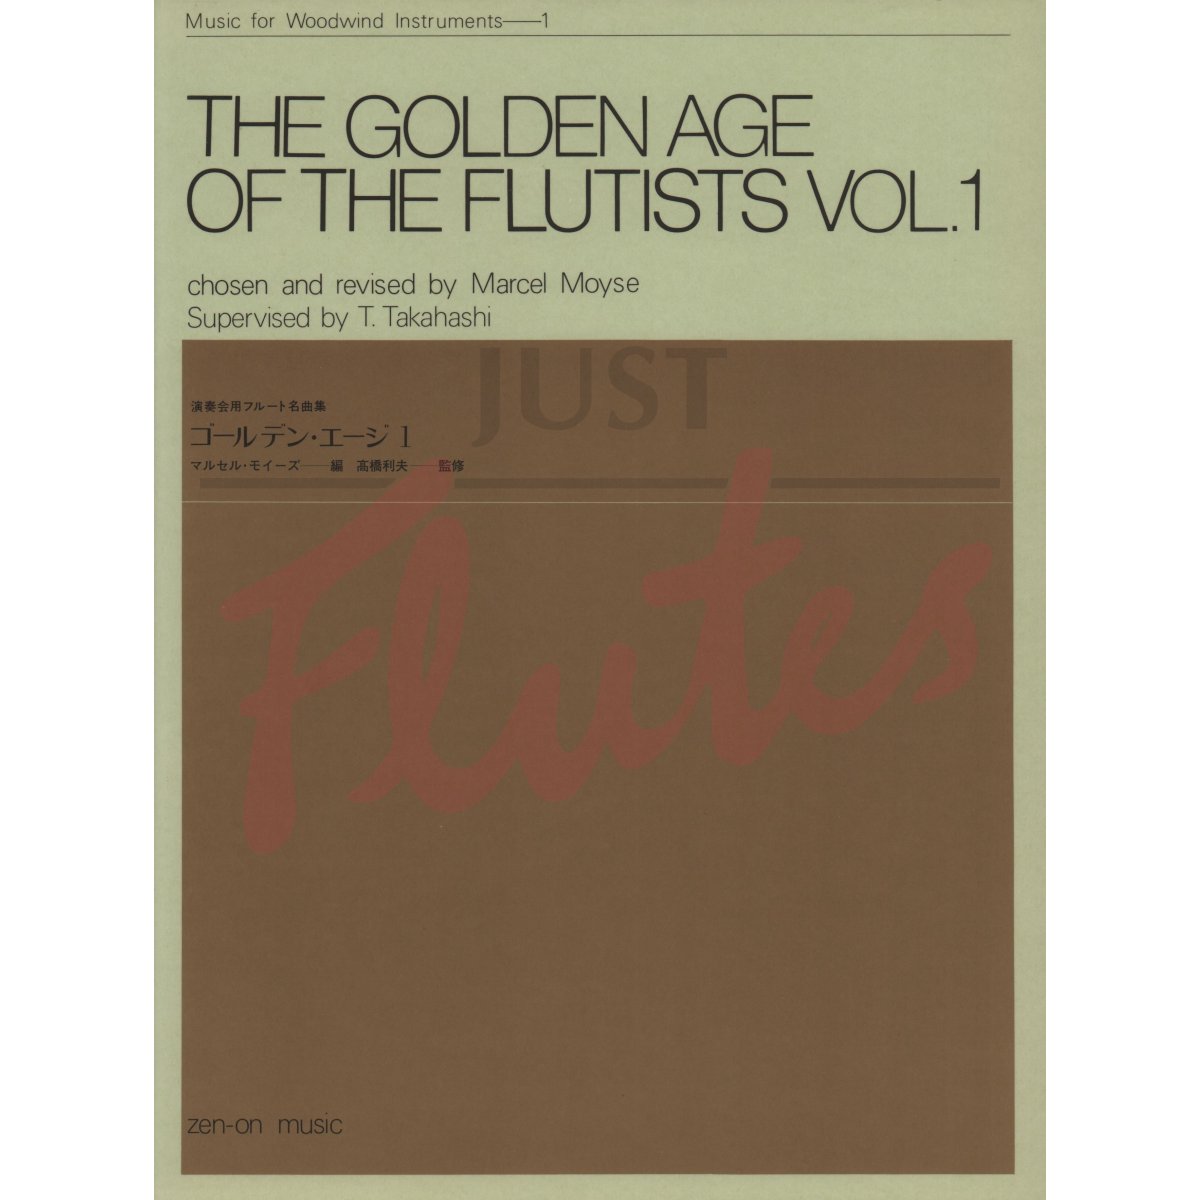 The Golden Age of the Flutists